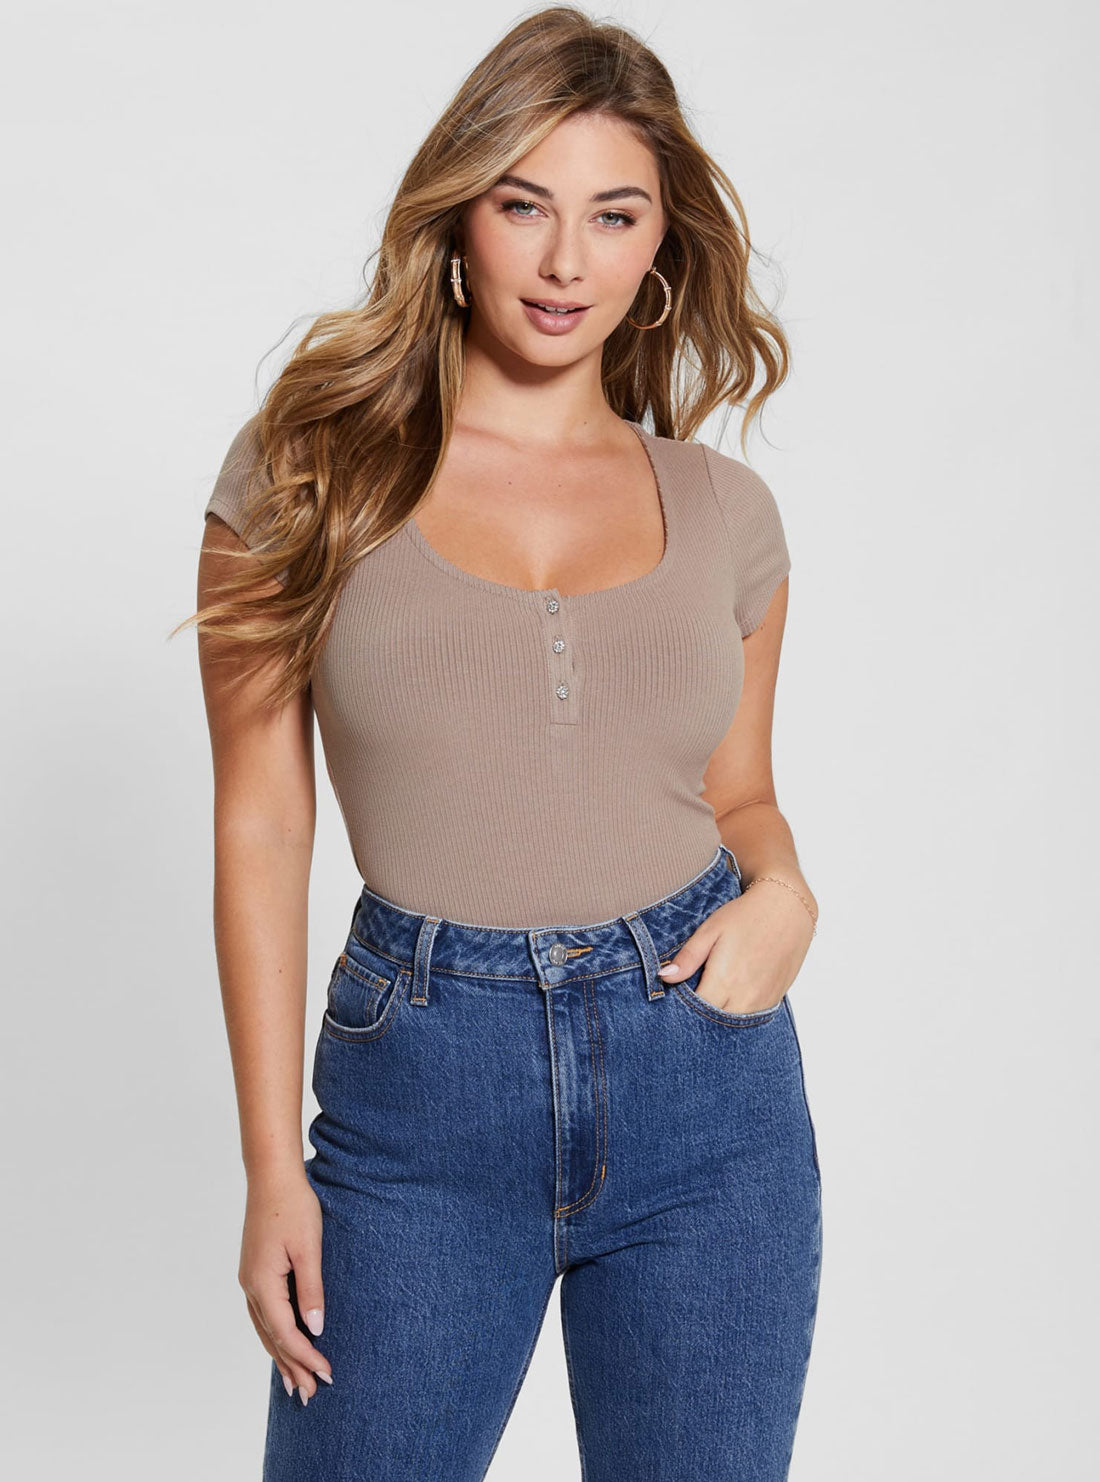 Eco Taupe Karlee Jewel Henley T-Shirt | GUESS Women's Apparel | Front view